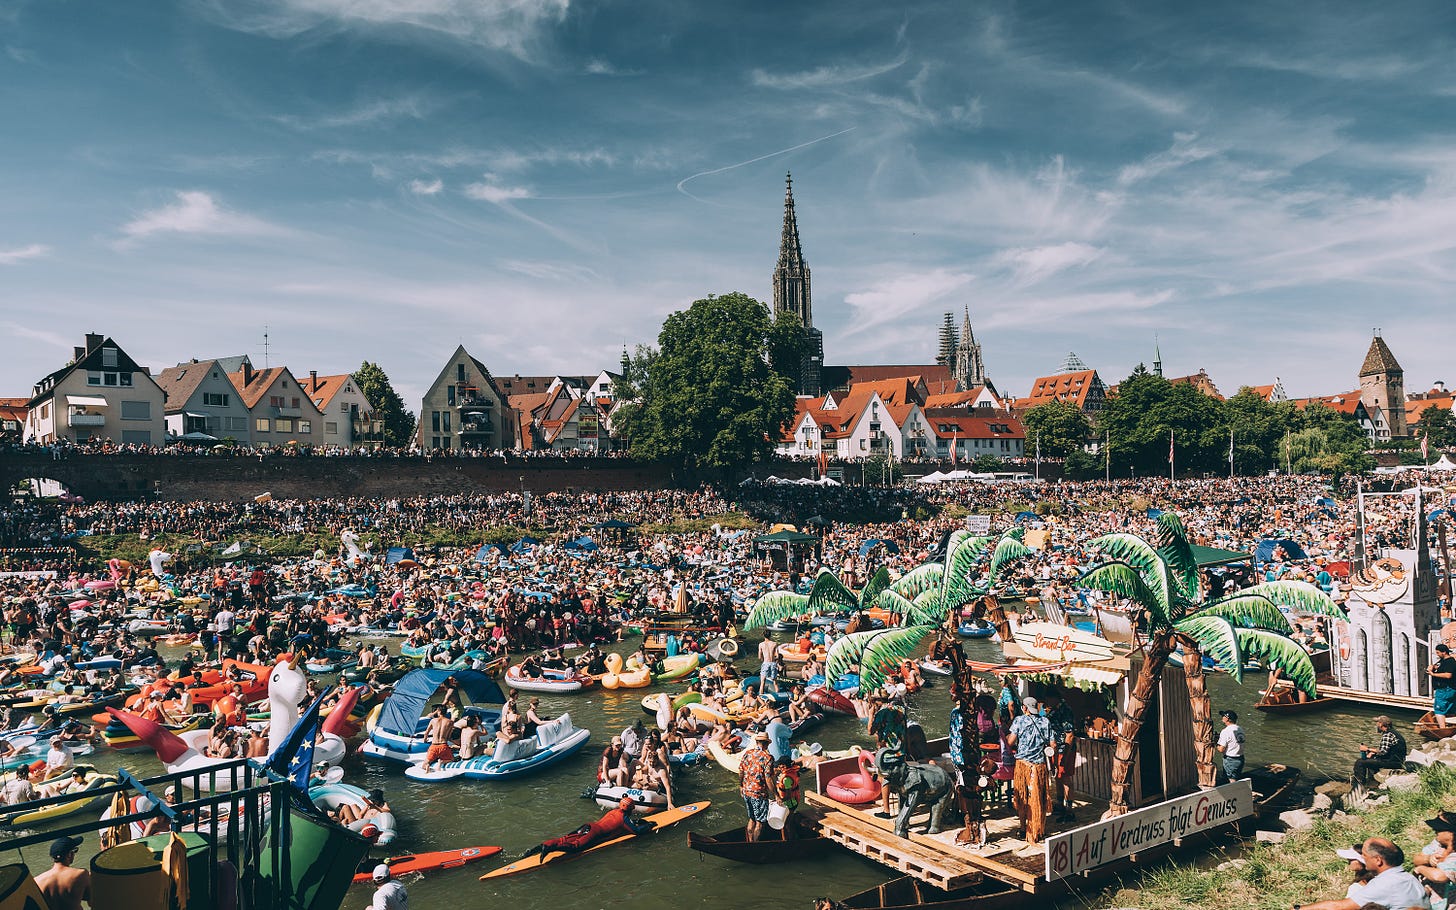 A chaotic scene of a river filled with people and inflatables, with floats that have palm trees on. There are also paddle boarders. In the background there are buildings and onlookers.